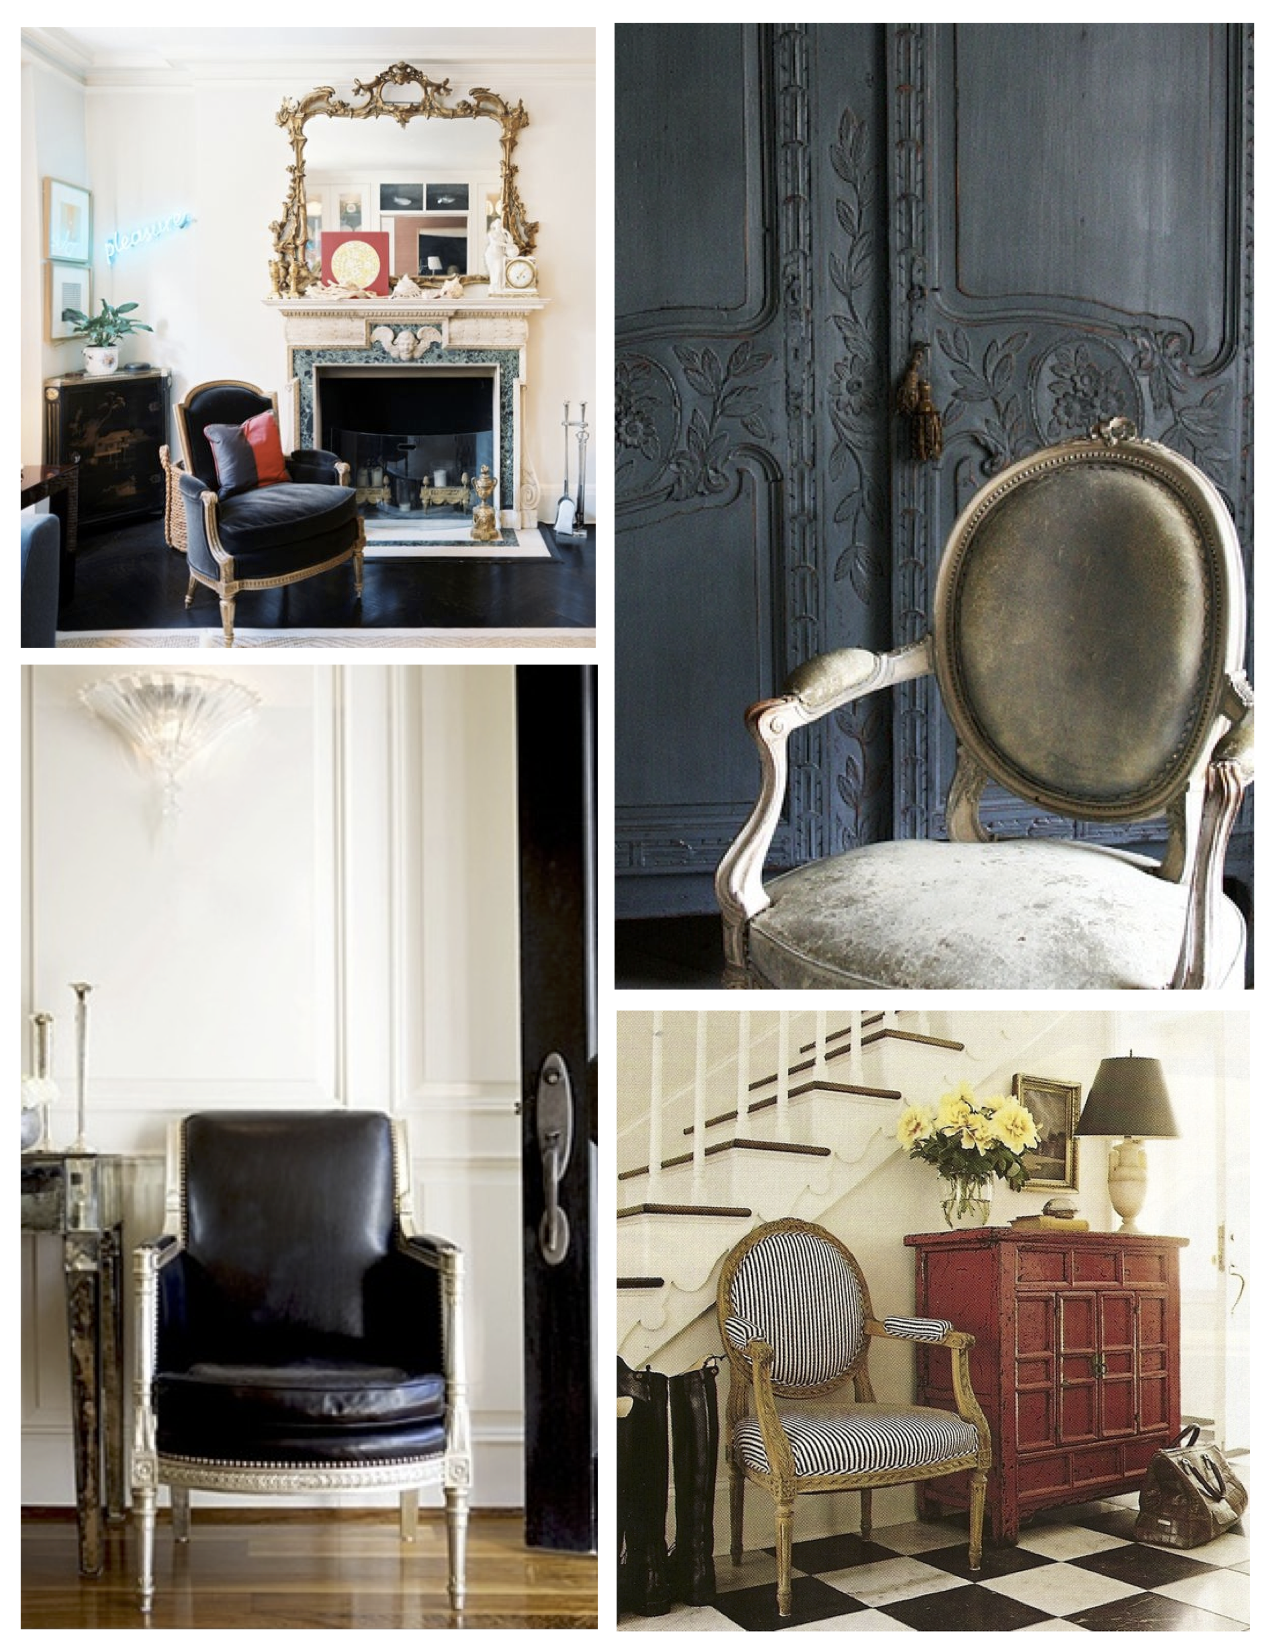 French By Royal Design: The “Louis”, “Fauteuil” & “Bergere” Chair ...